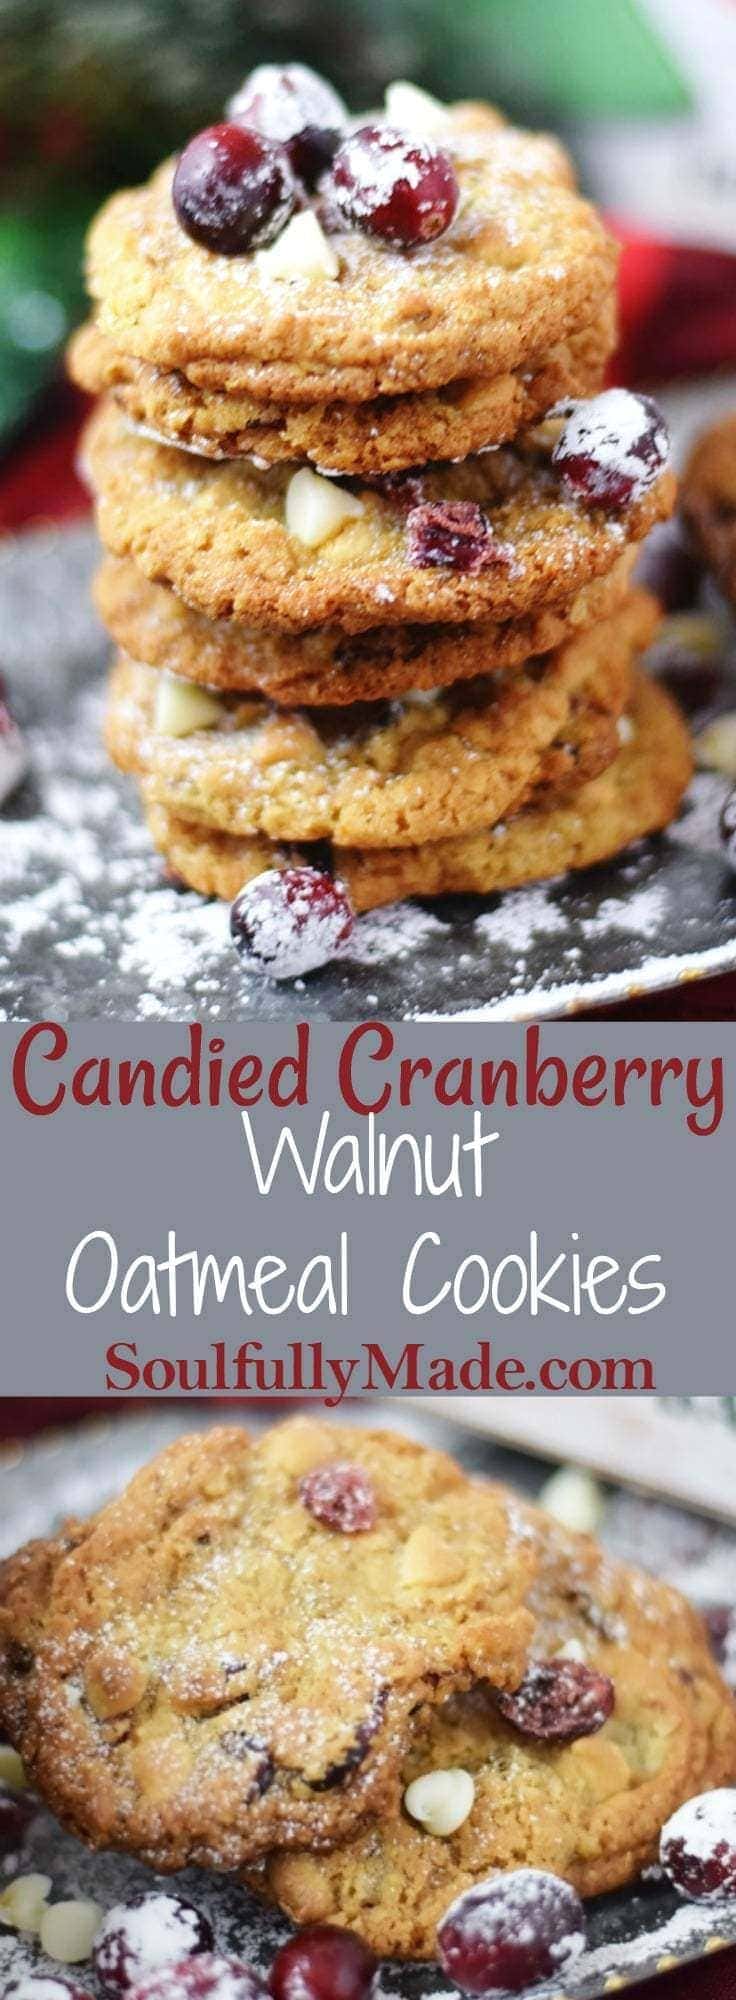 the pinterest image for these candied cranberry walnut cookies